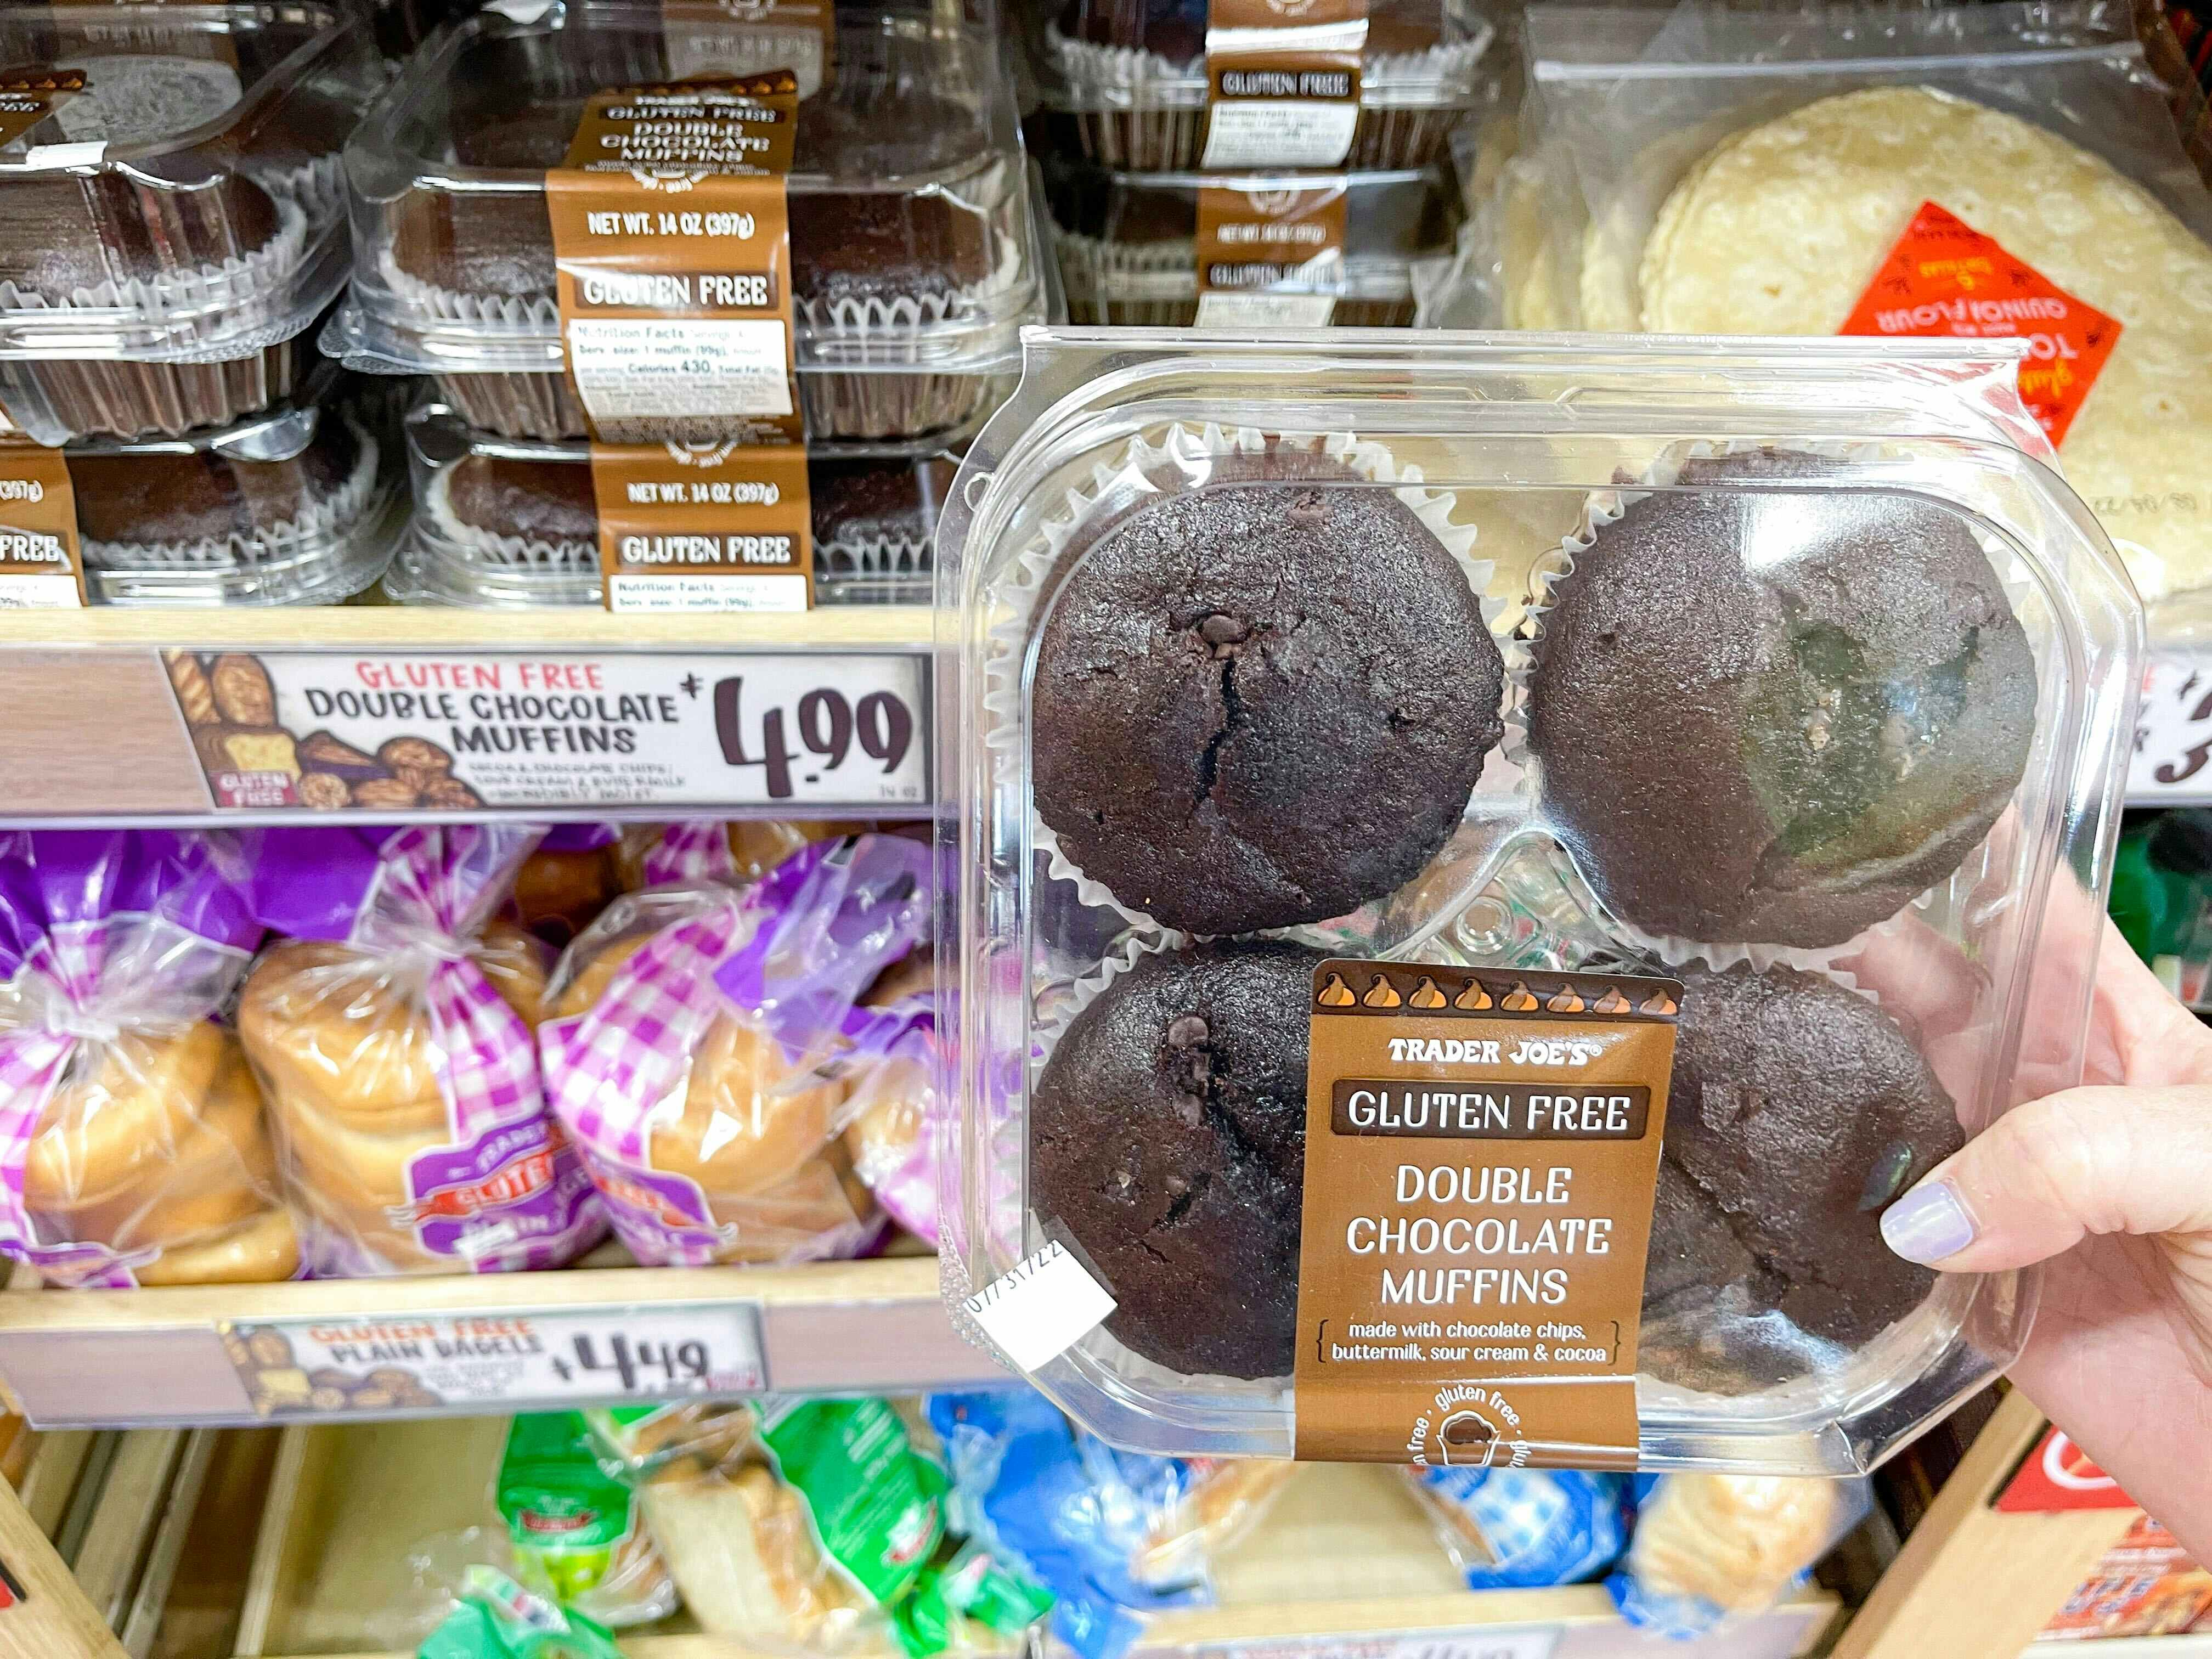 A person's hand holding a container of Trader Joe's Gluten Free Double Chocolate Muffins in front of a shelf of them at Trader Joe's.